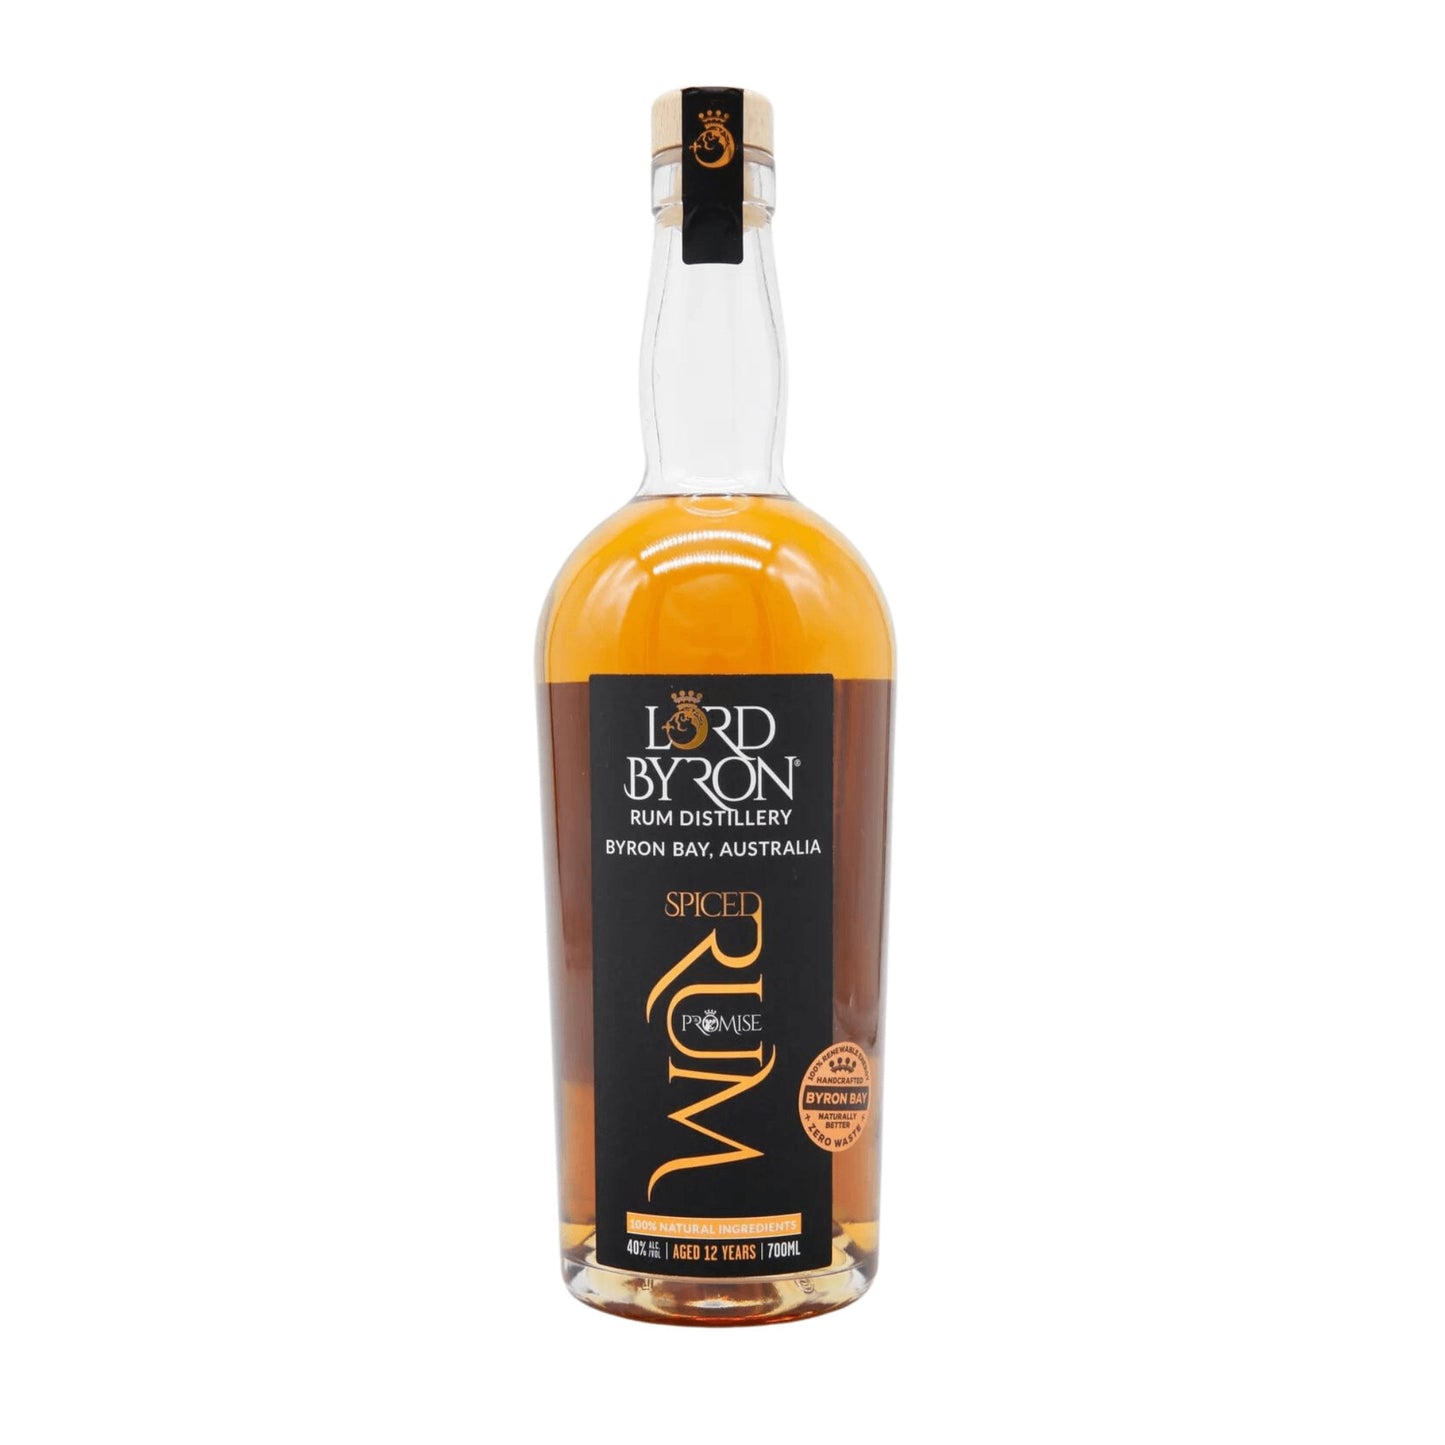 Lord Byron 12 Year Old Promise Spiced Rum 700mL - Booze House